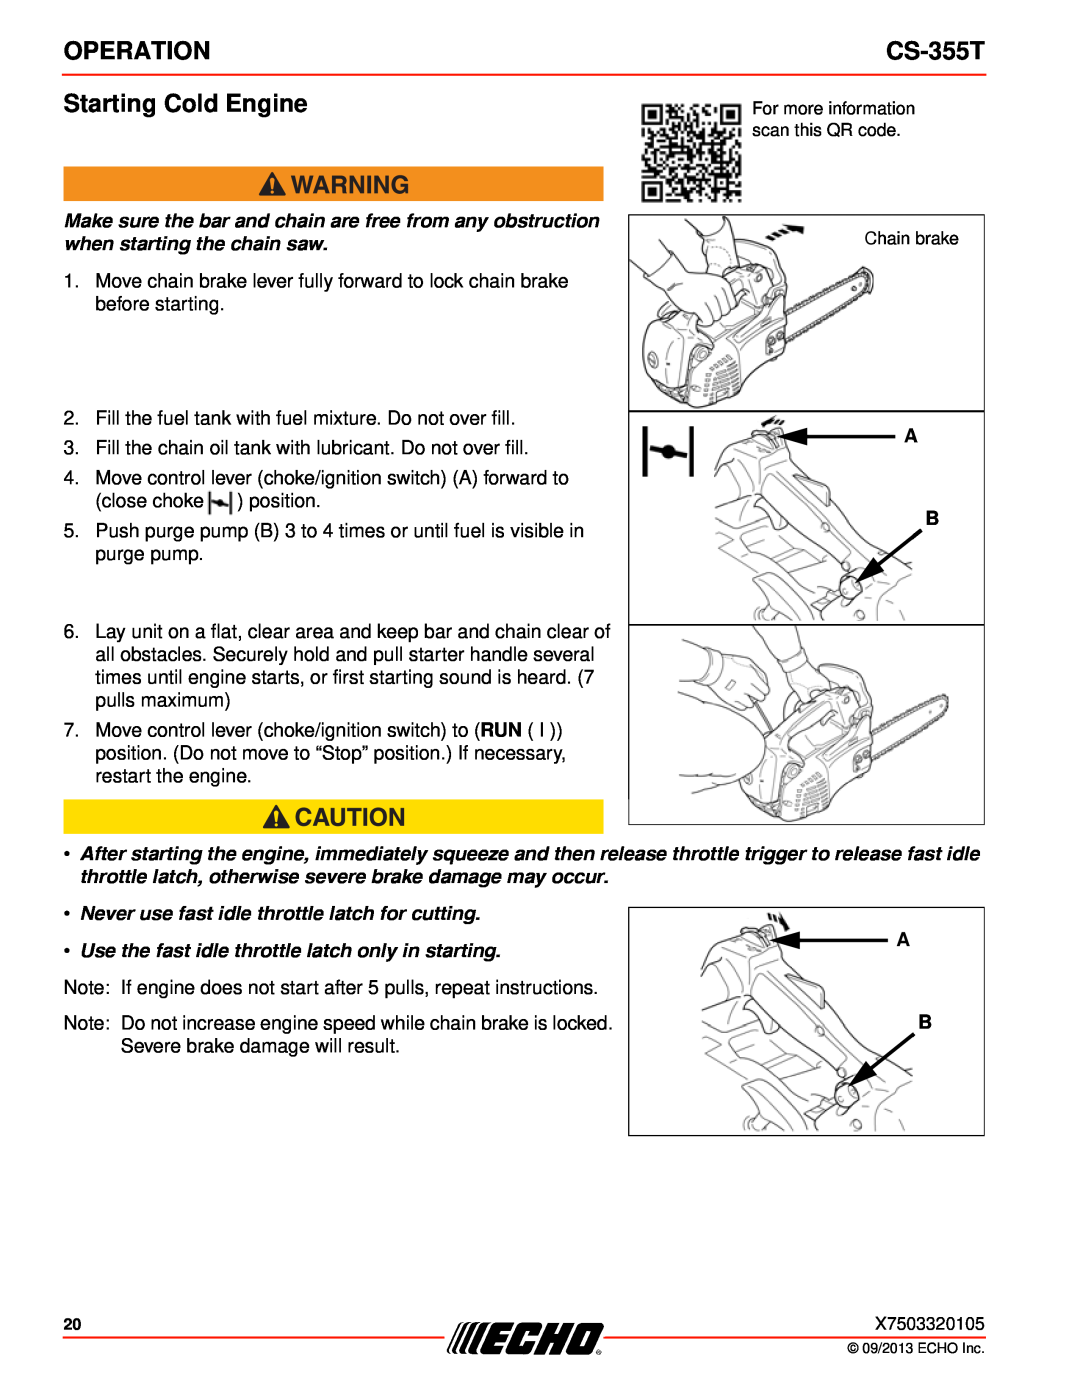 Echo CS-355T instruction manual Starting Cold Engine, Operation, Never use fast idle throttle latch for cutting 